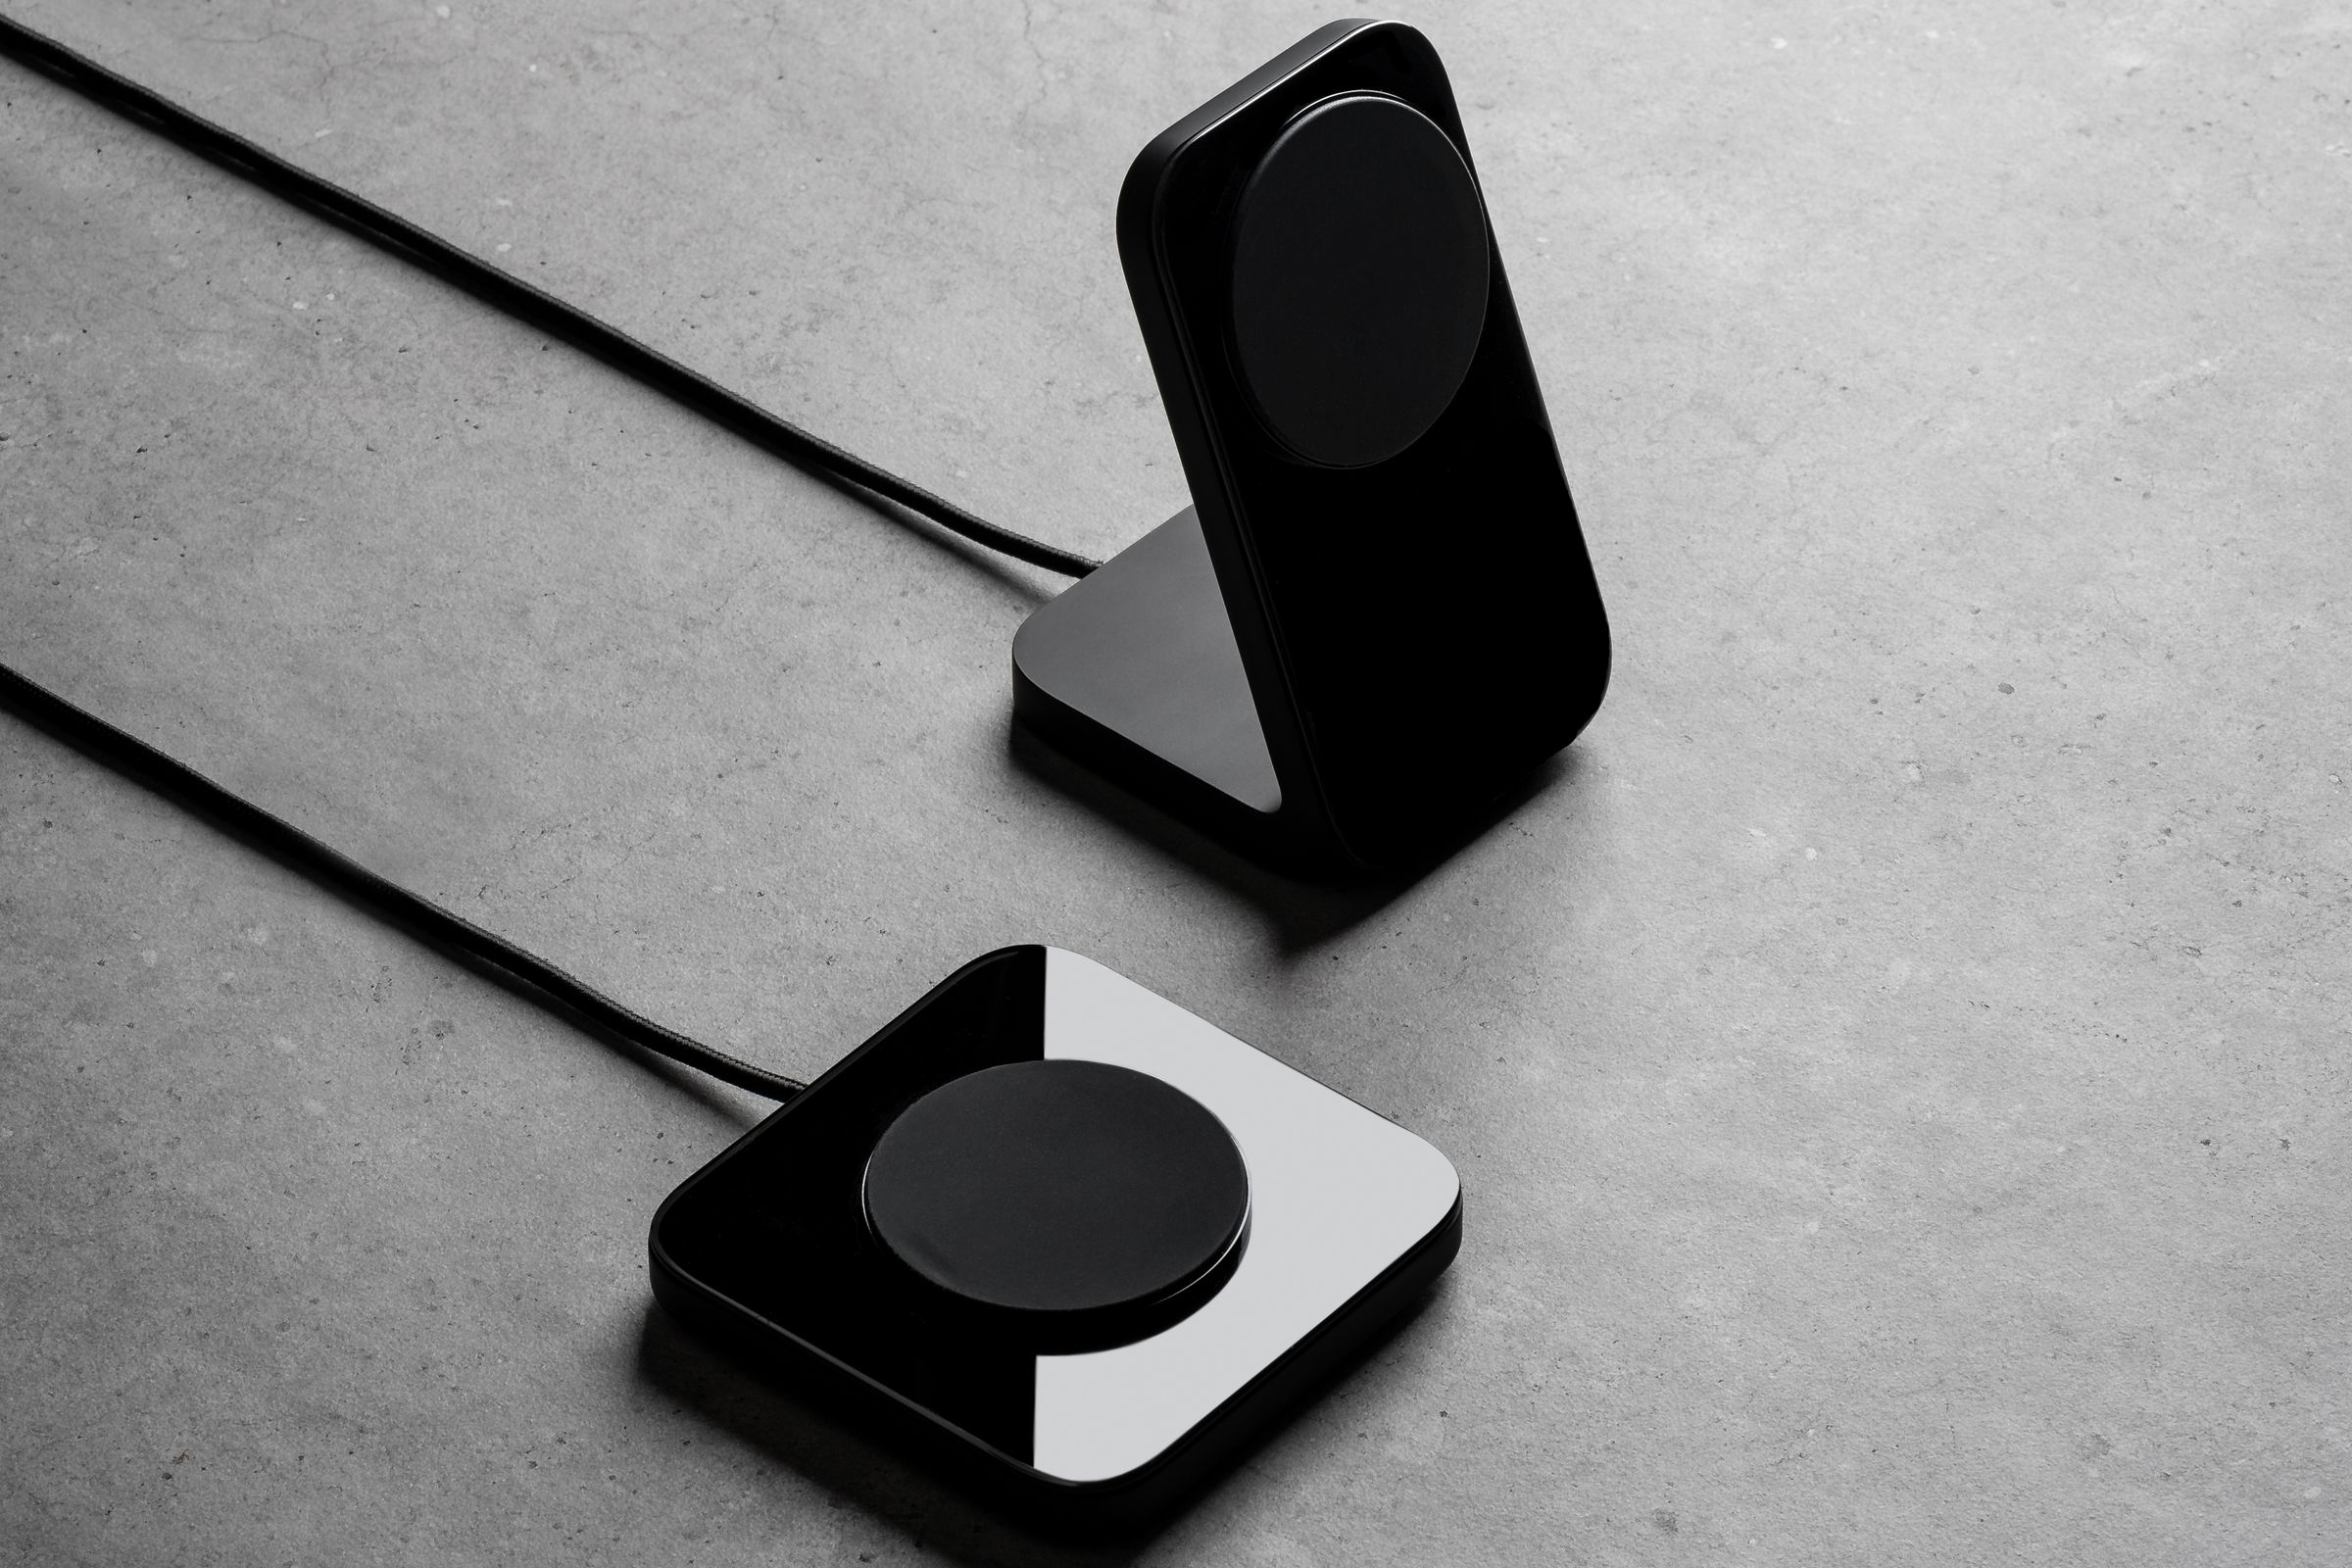 A marketing image of the Nomad Stand and Nomad Base magnetic wireless chargers, in black, sitting beside each other on a gray surface.